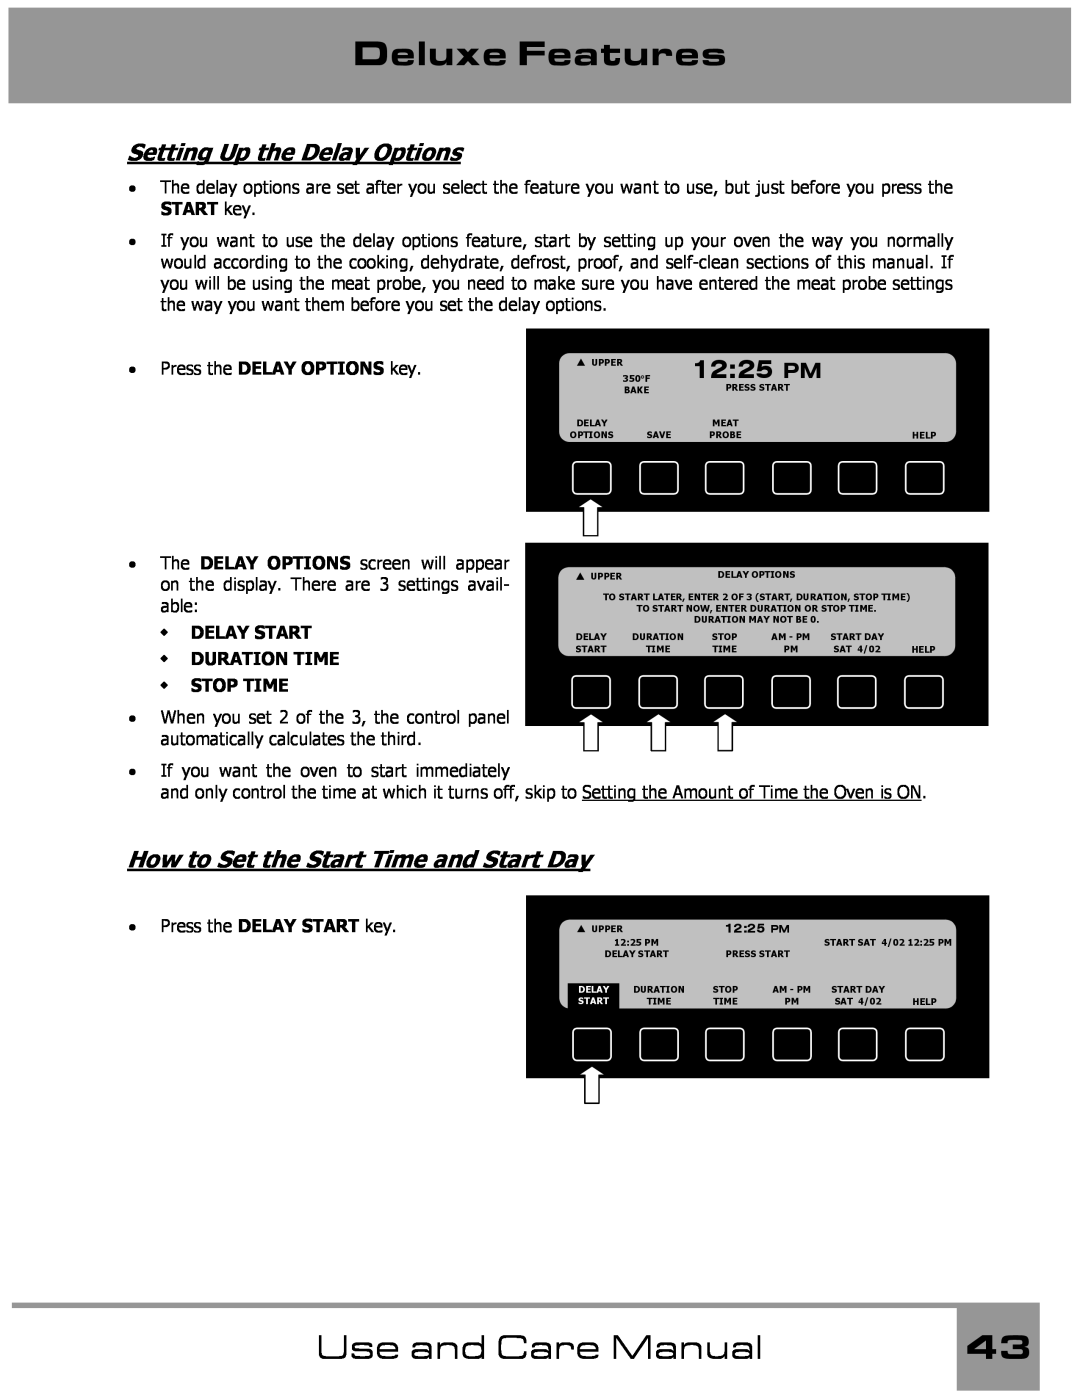 Dacor Wall Oven manual Setting Up the Delay Options, How to Set the Start Time and Start Day, Deluxe Features, 1225 PM 